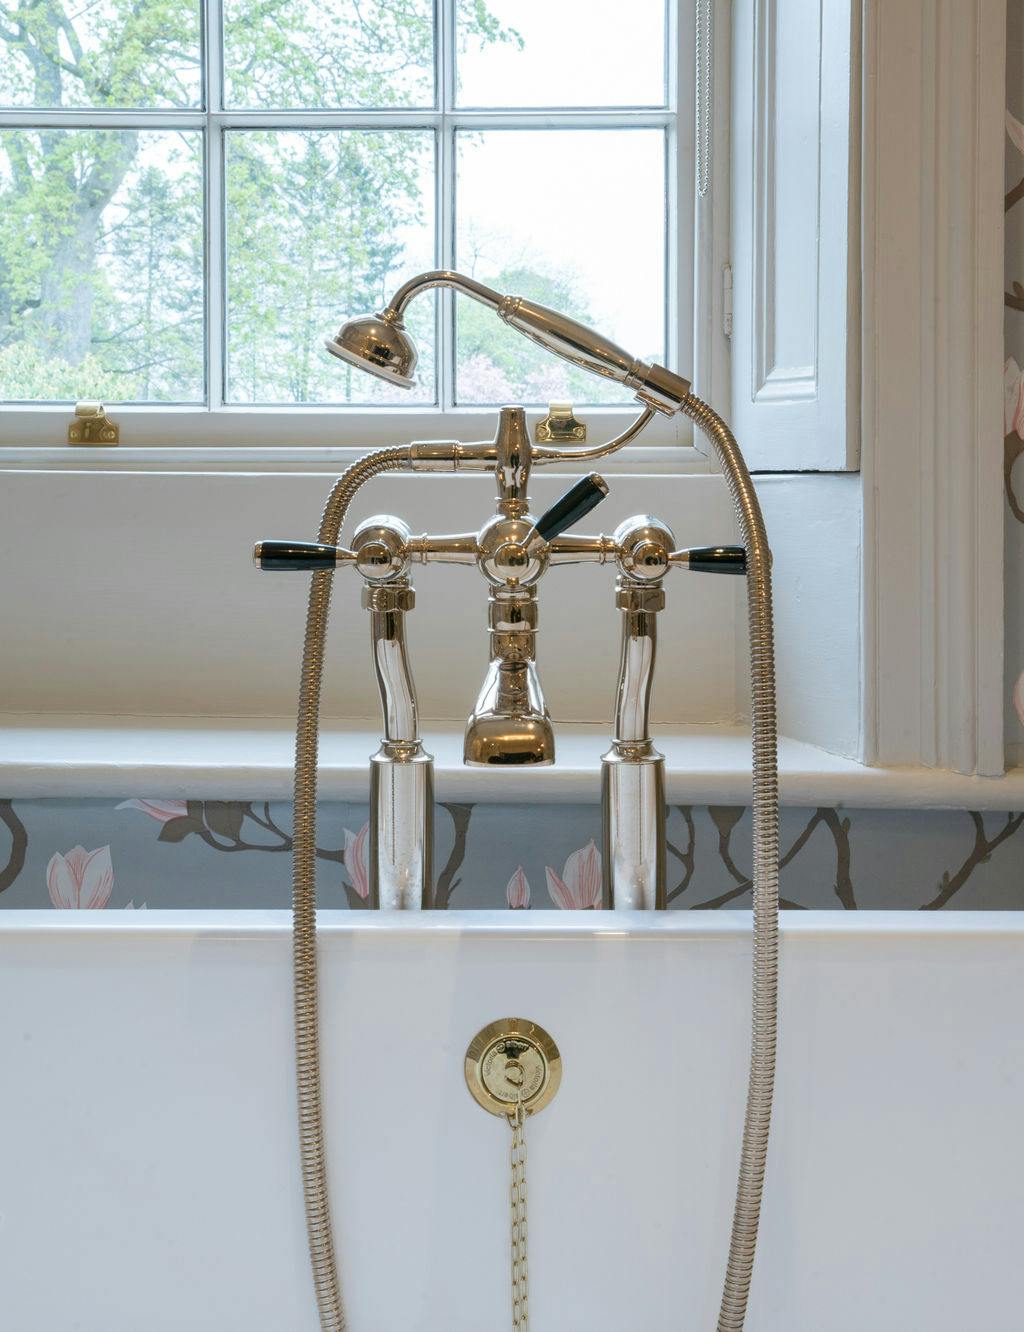 Samuel Heath brass bath and shower mixer. Traditional Fairfield collection in a Polished Nickel finish with gloss black levers.